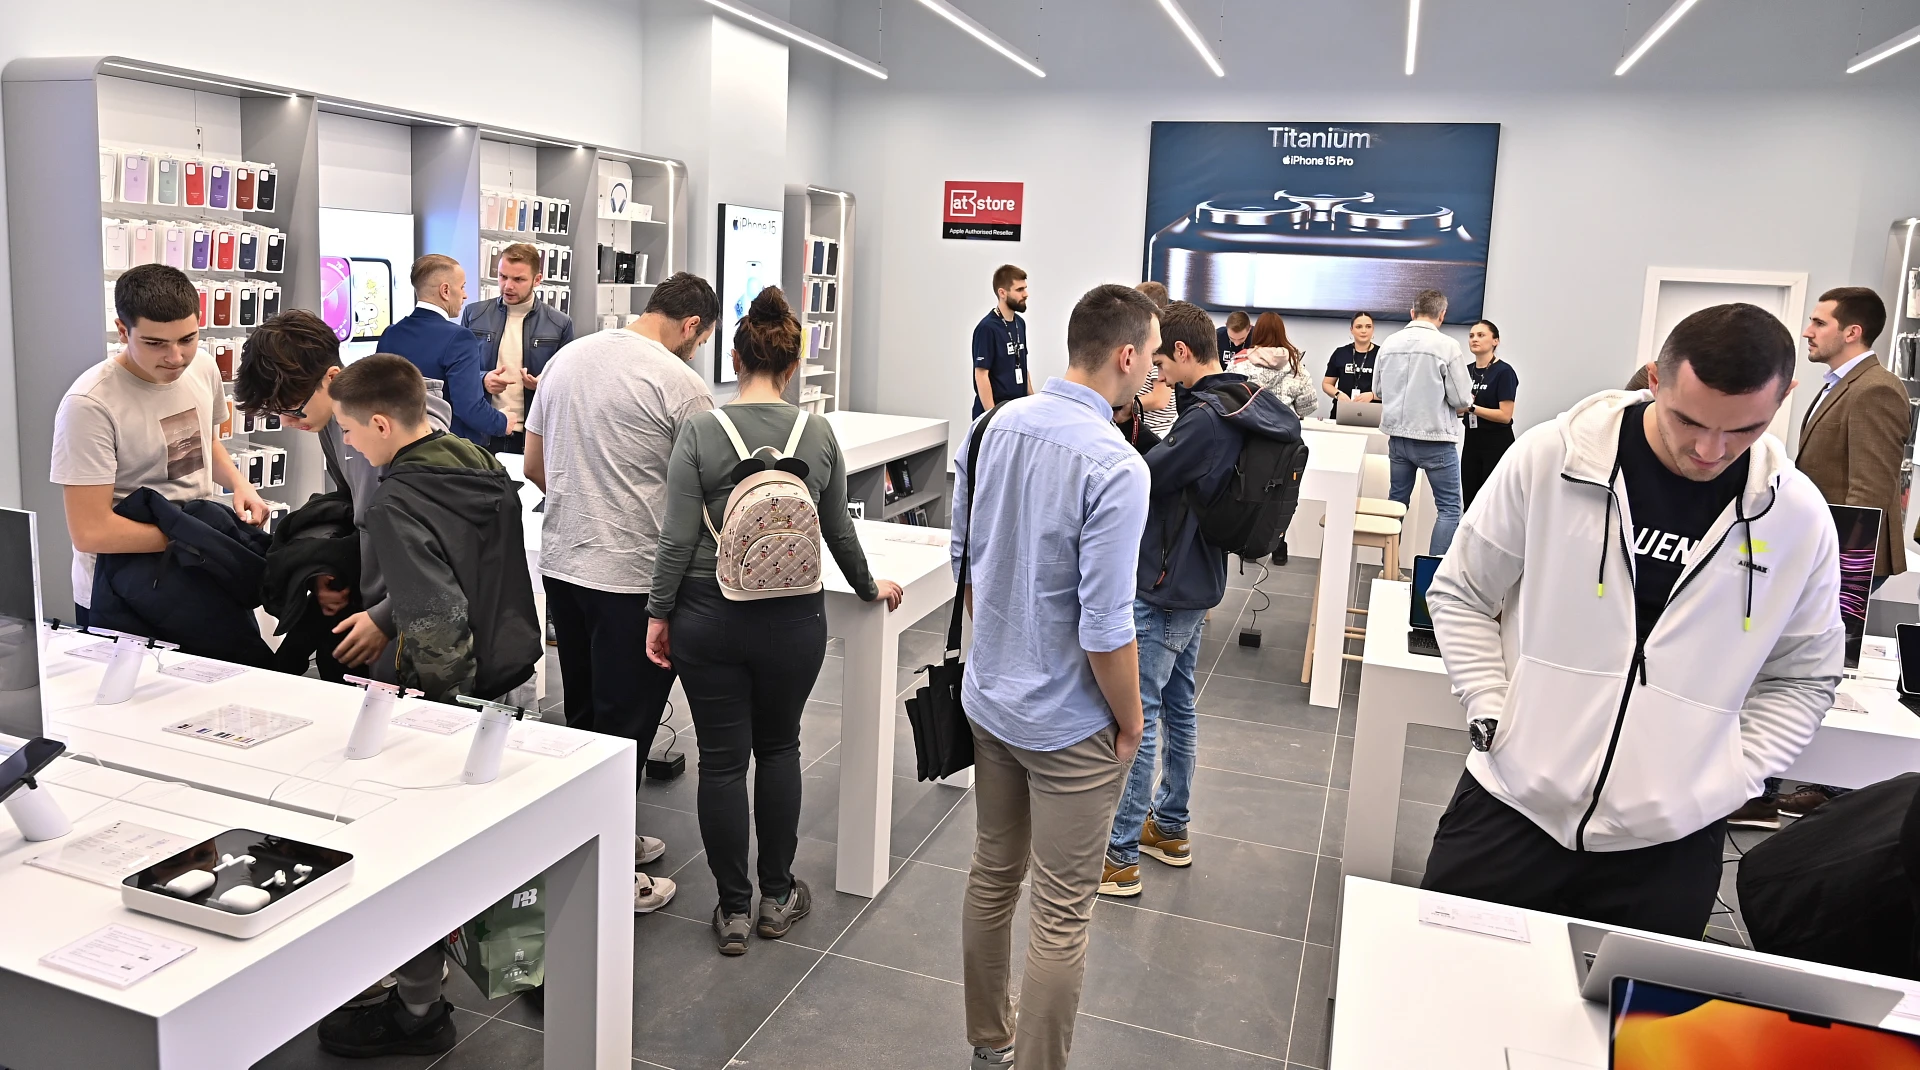 people are seen inside a hi tech store looking at Apple products